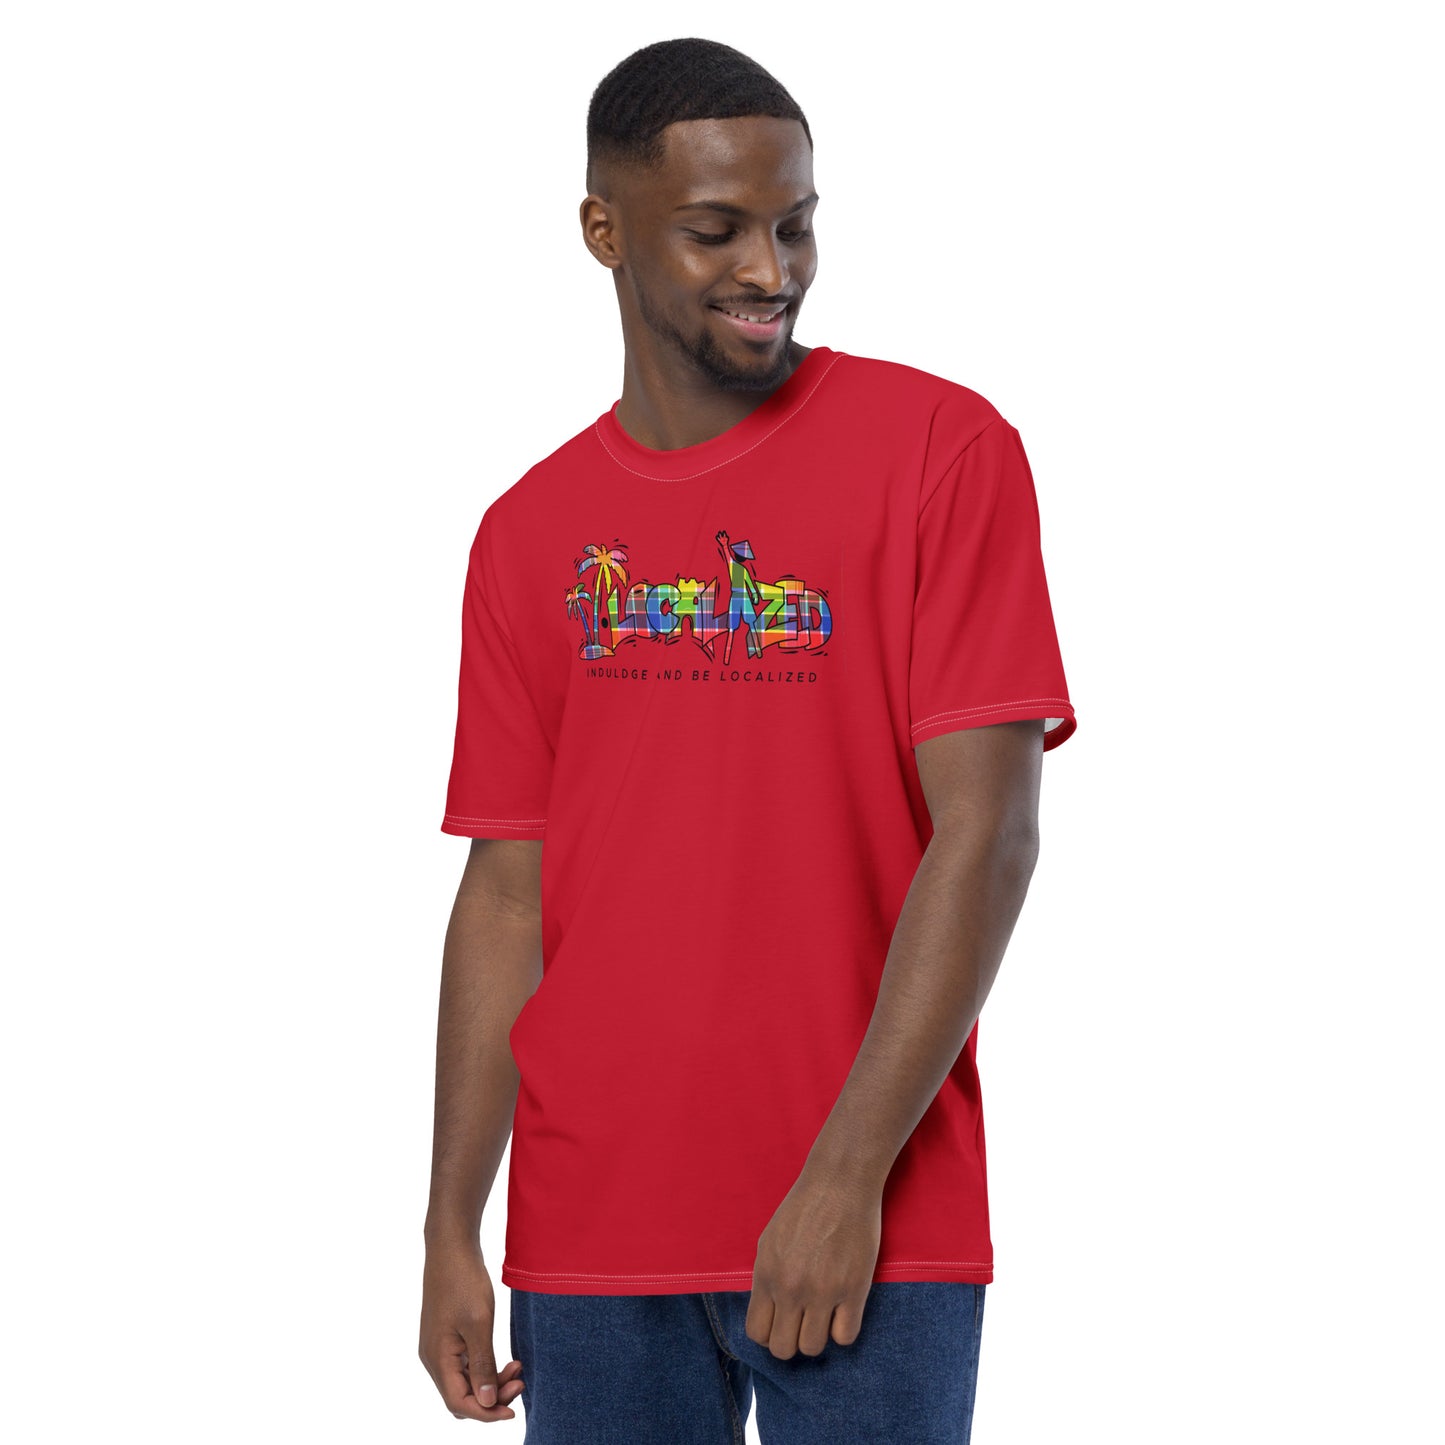 Red V.Localized (Madras) Men’s Dry-Fit T-Shirt